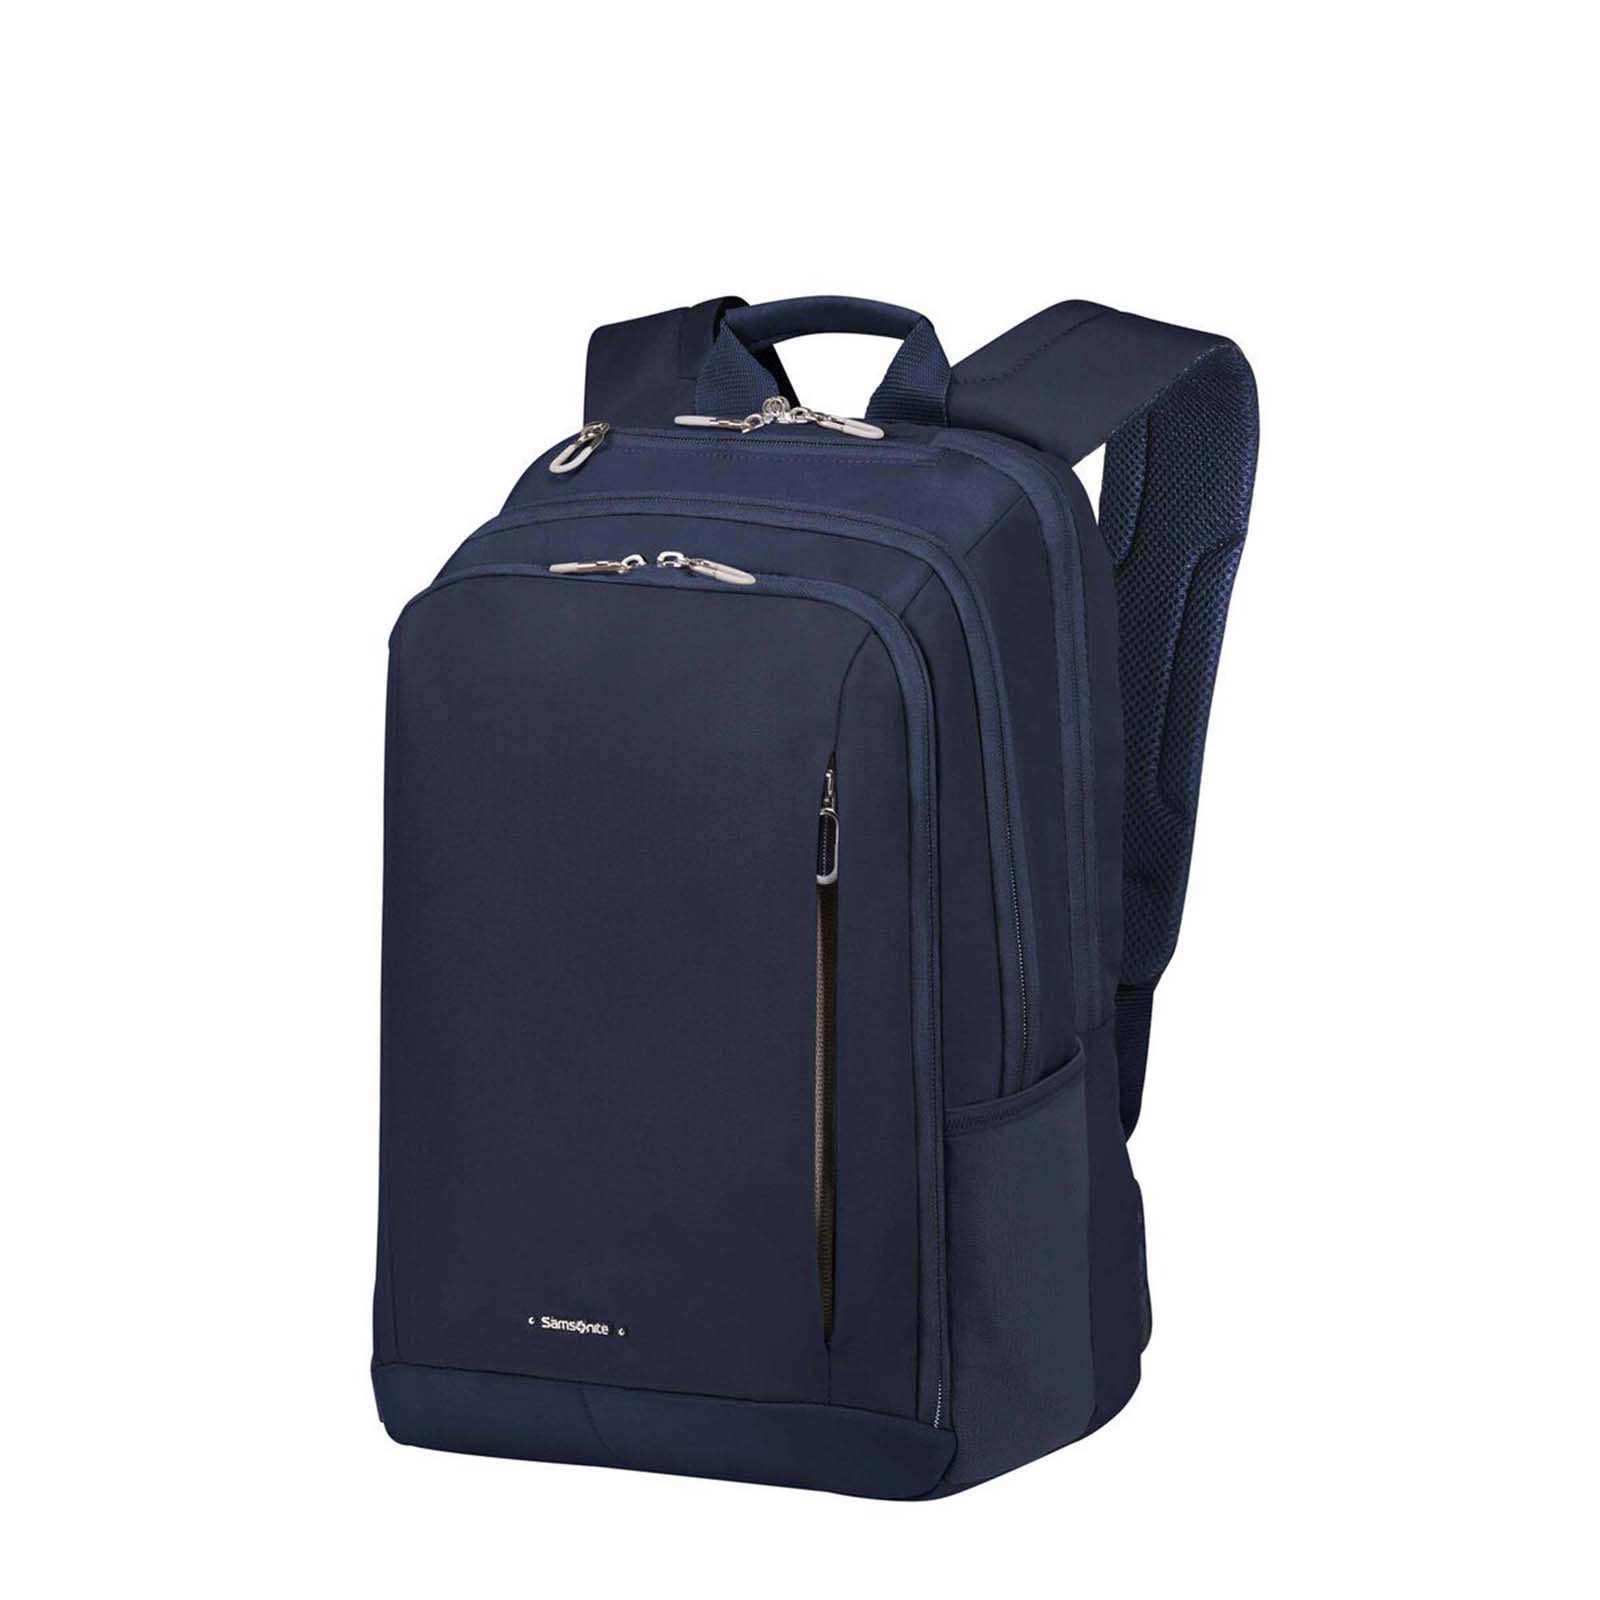 Samsonite-Guardit-Classy-15-Inch-Laptop-Backpack-Midnight-Blue-Front-Angle